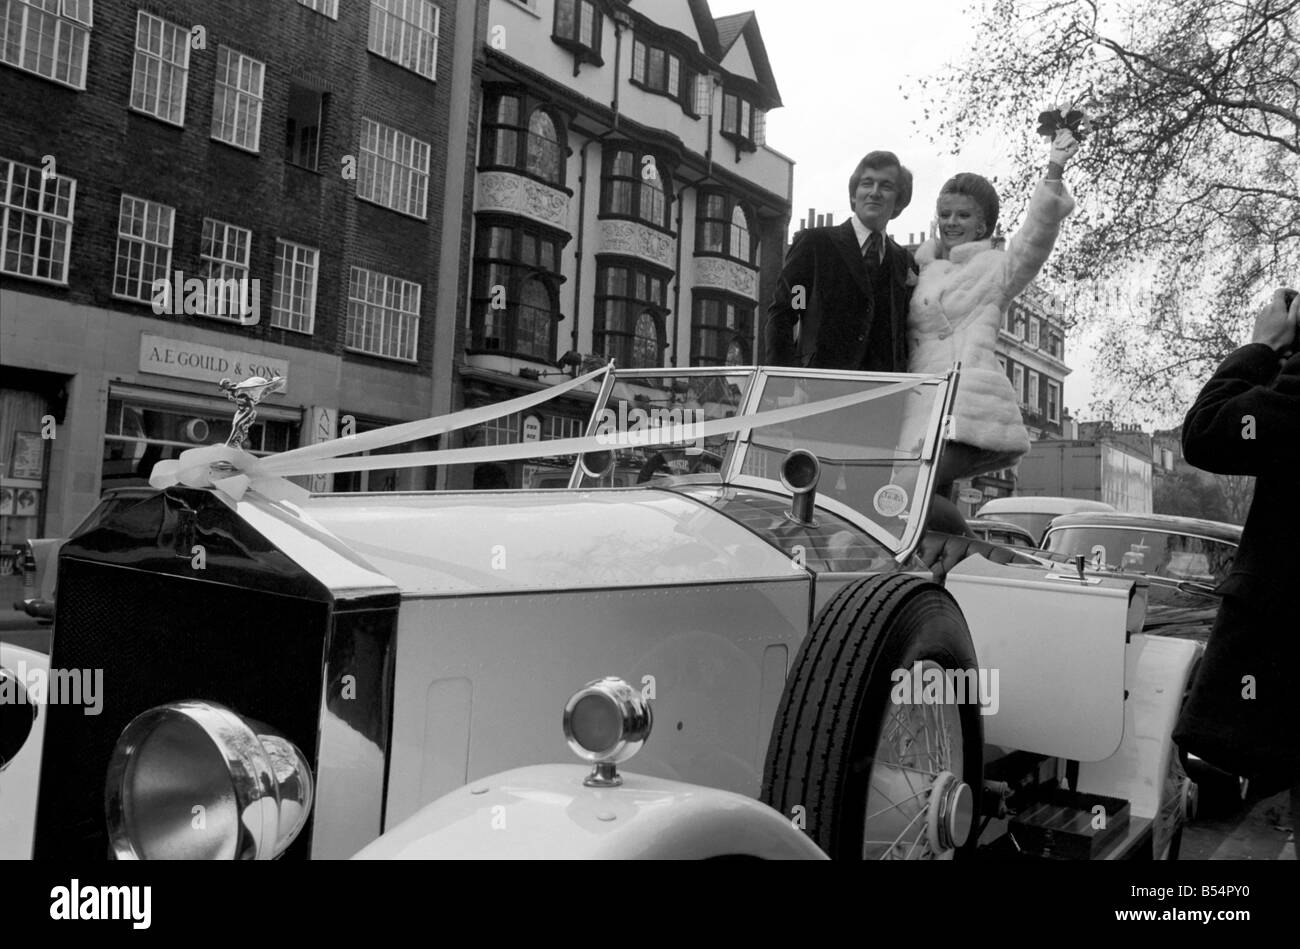 Actess and top model Vicki Hodge today married Ian Heath ,who is in advertising, at Chelsea Register Office. The bride wore a white mini dress and coat, and the couple drove off after the ceremony to a small lunch reception in a white 1923 Rolls Royce. The couple, Vicki and Ian pictured in the 1923 white Rolls Royce after the ceremony. December 1969 Z11599-006 Stock Photo